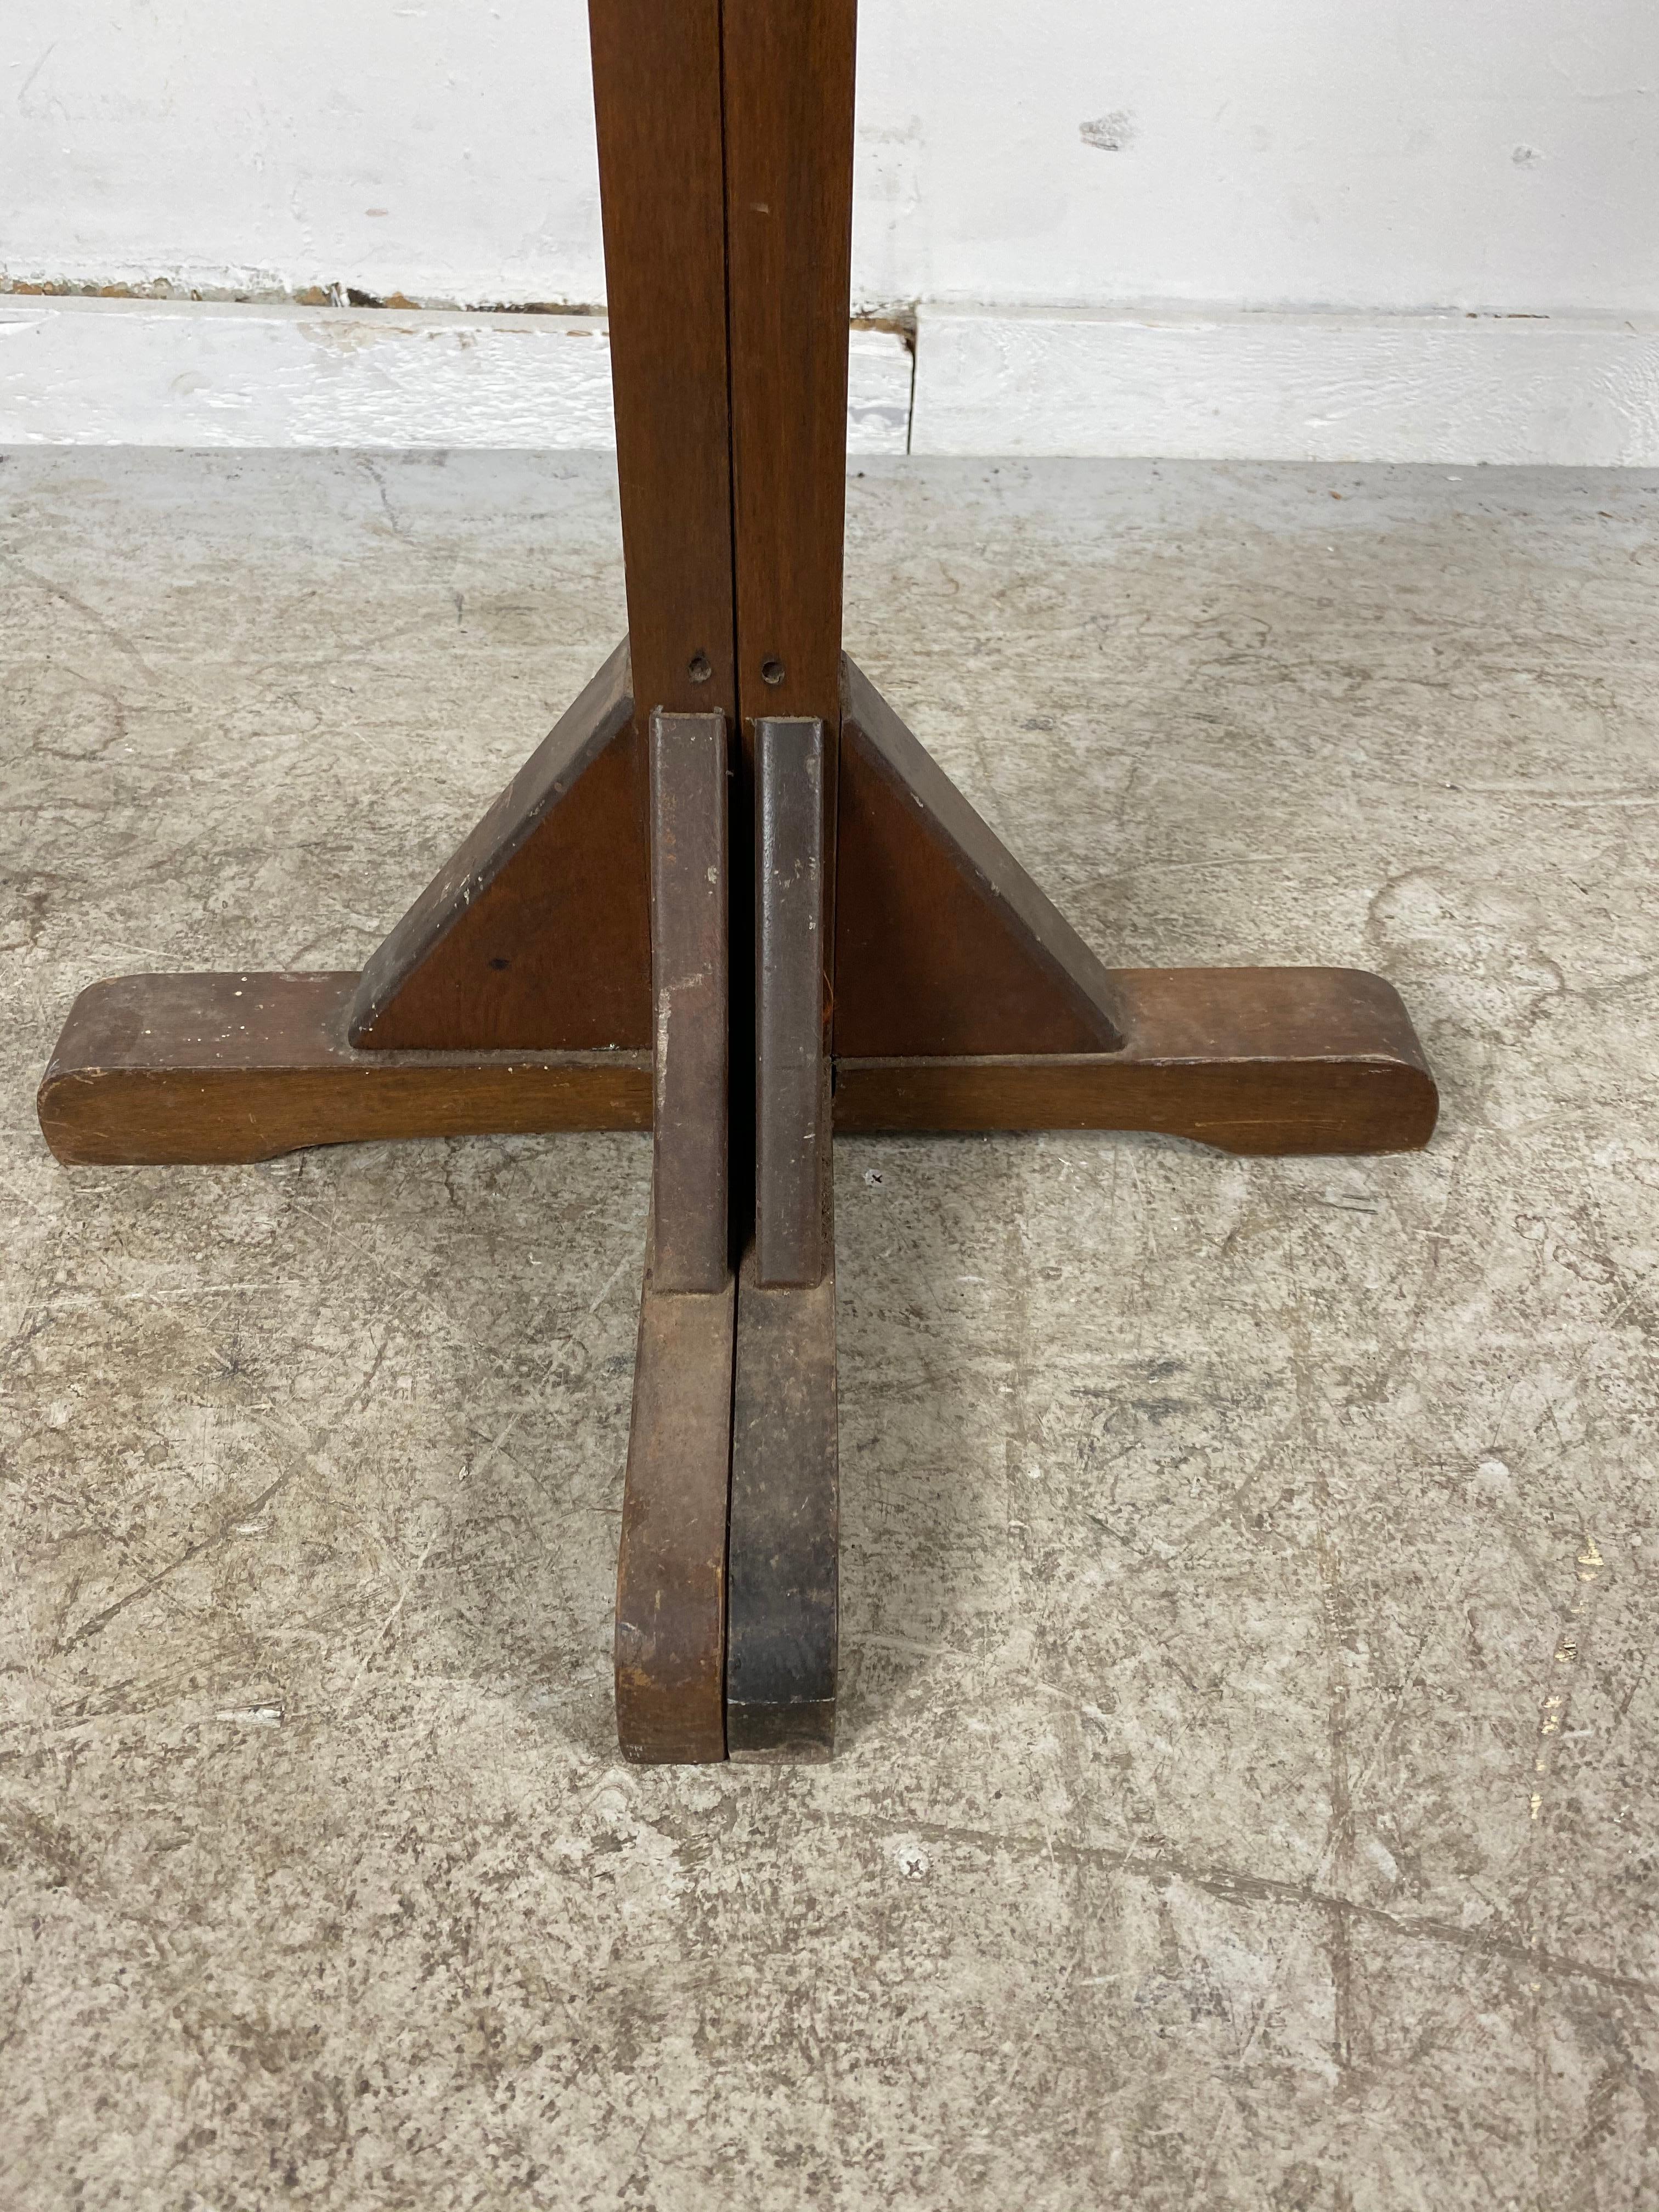 Rare and unusual expanding Arts & Crafts free standing coat tree or stand, ingenious design, traditional coat tree that expands to create coat rack, retains original finish, patina as well as original brass hooks, measurements: closed 18